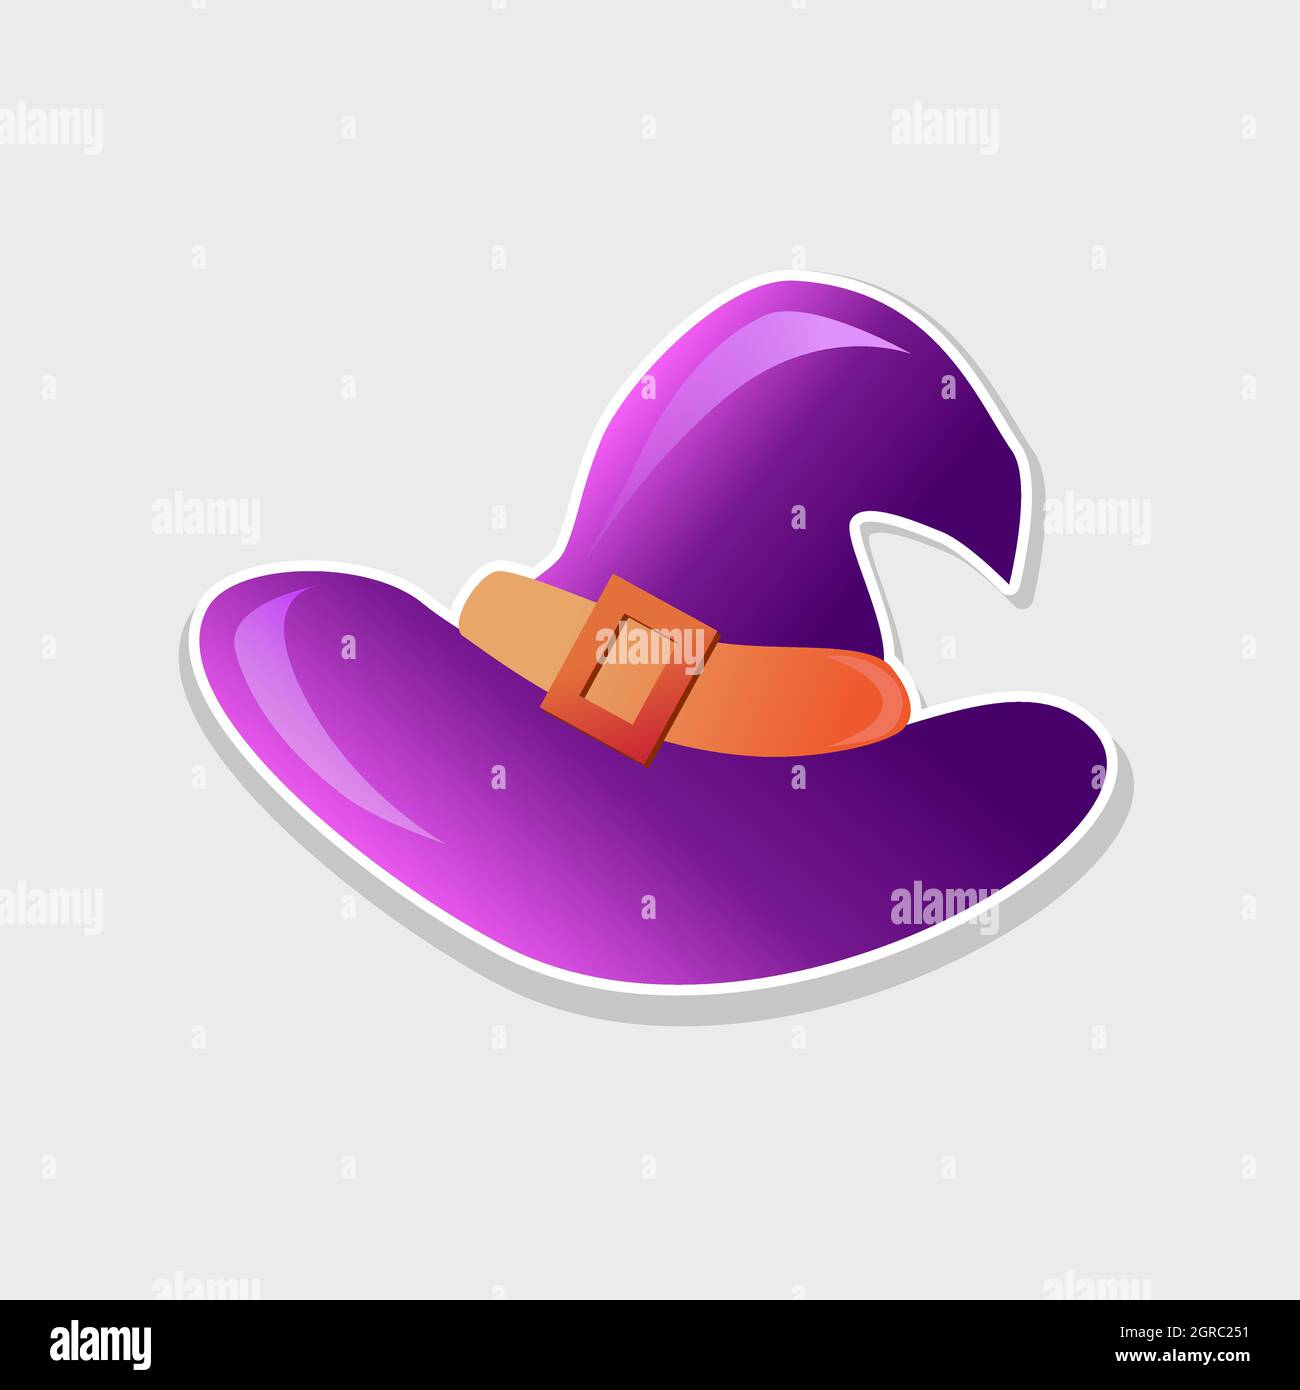 Vector purple witch hat sticker icon for your Halloween decorations. Easy to recolour, with removable background. For party invites, sale banners, ads Stock Vector